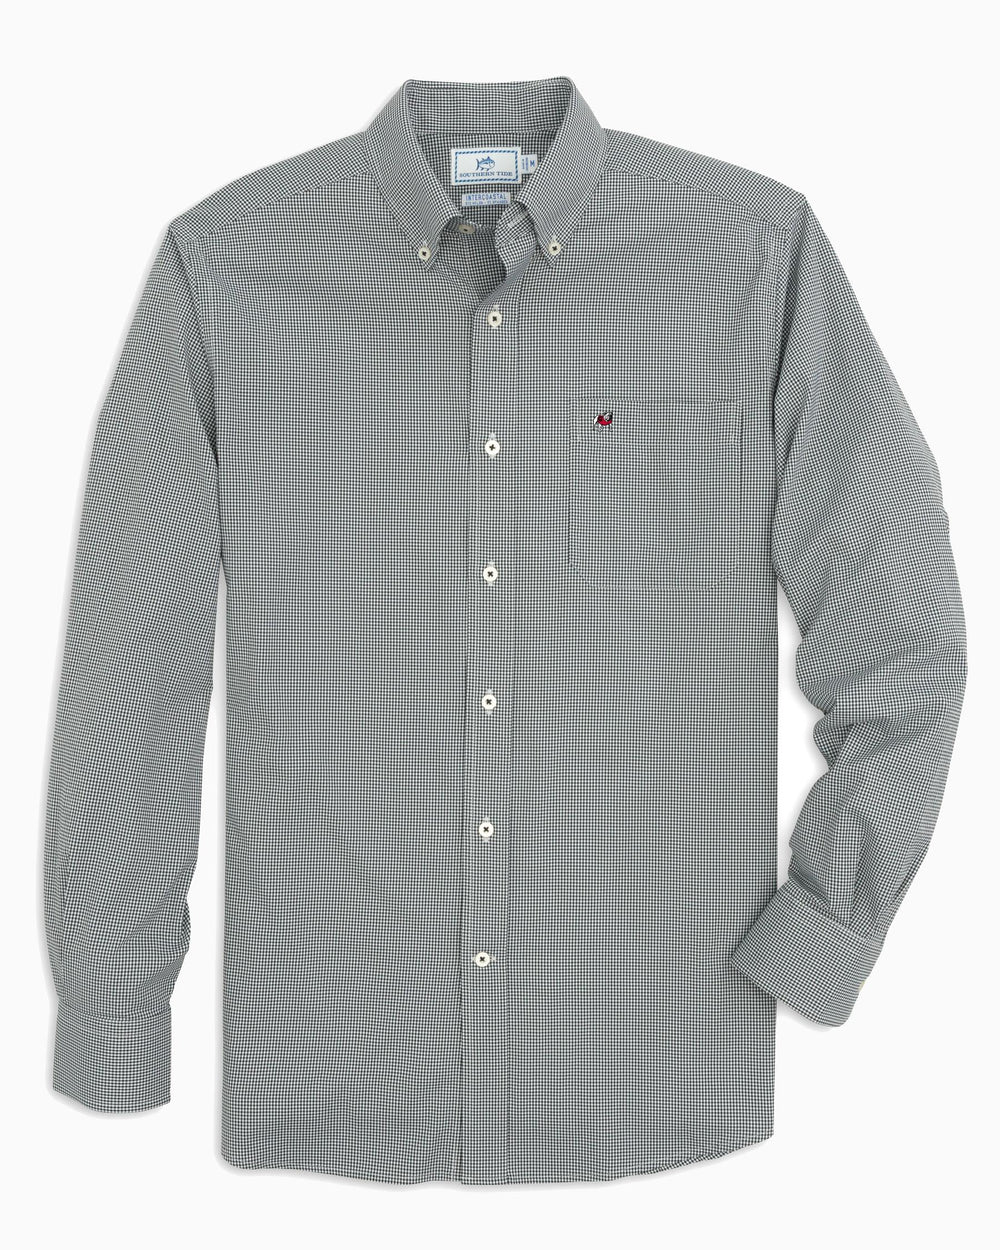 The front view of the Men's Black Georgia Bulldogs Gingham Button Down Shirt by Southern Tide - Black